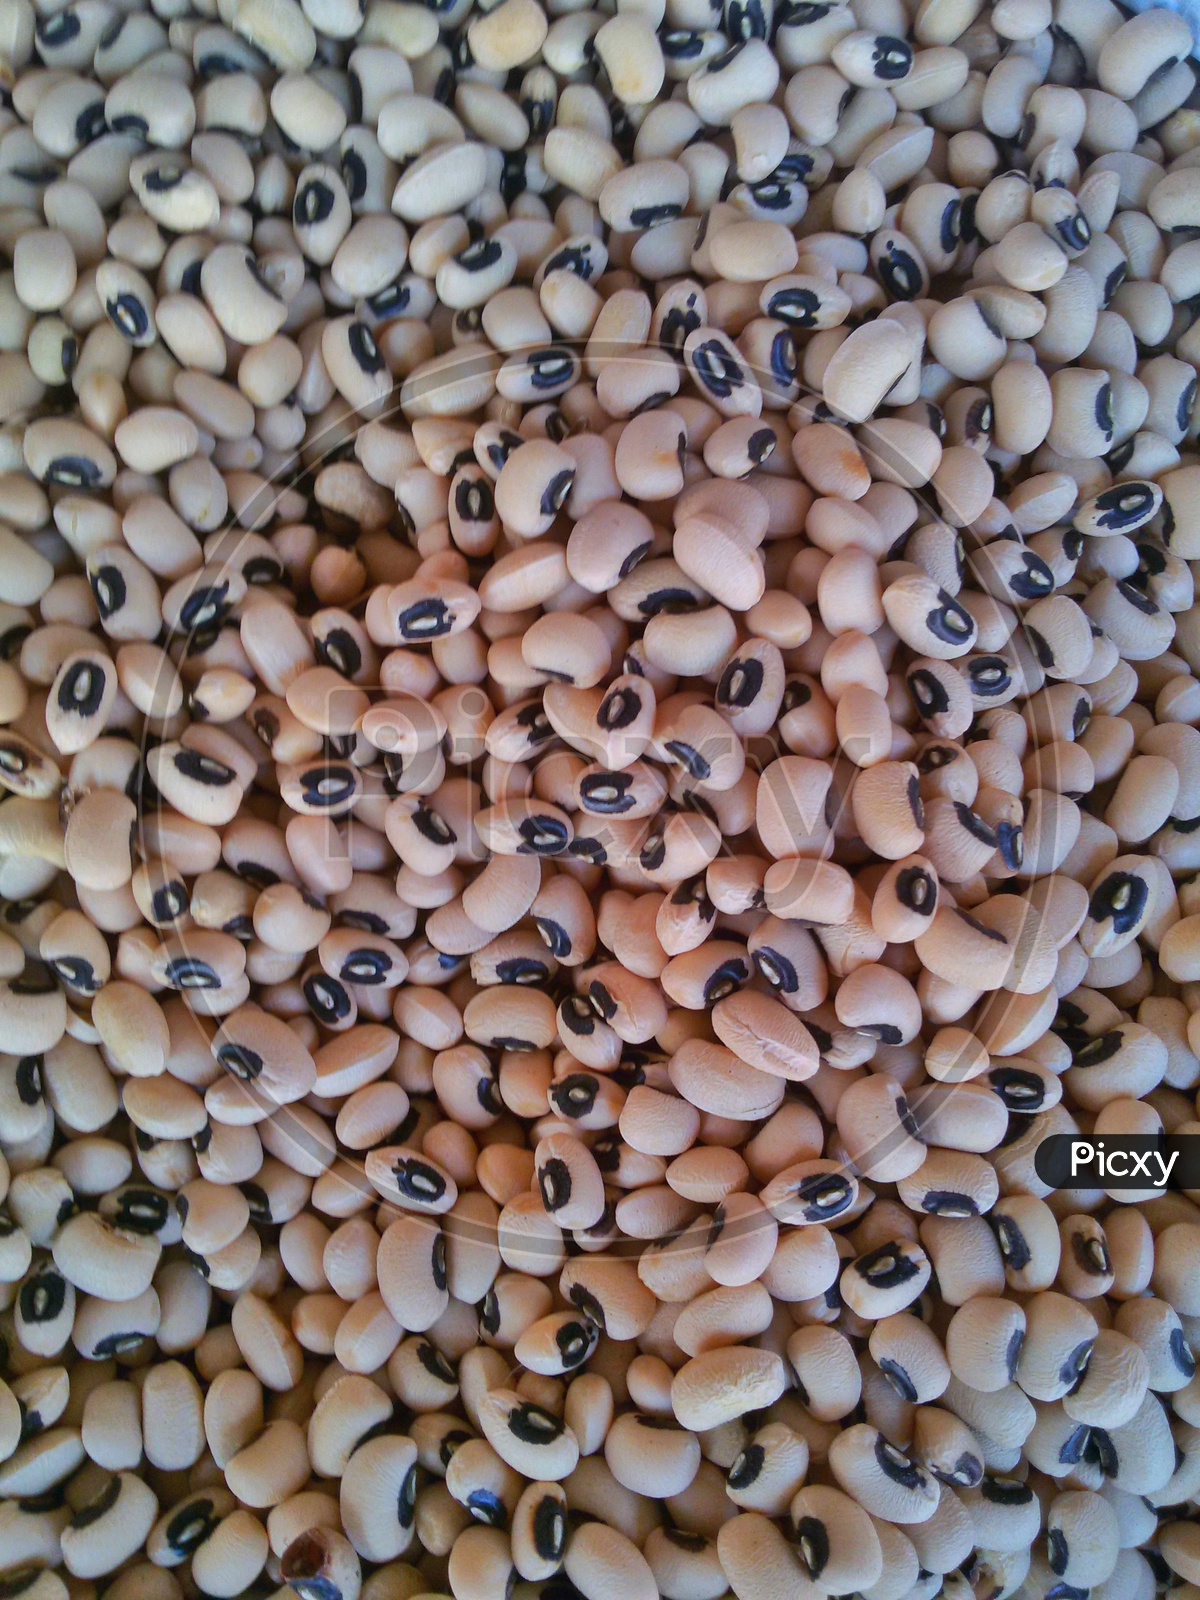 Close up of cowpeas